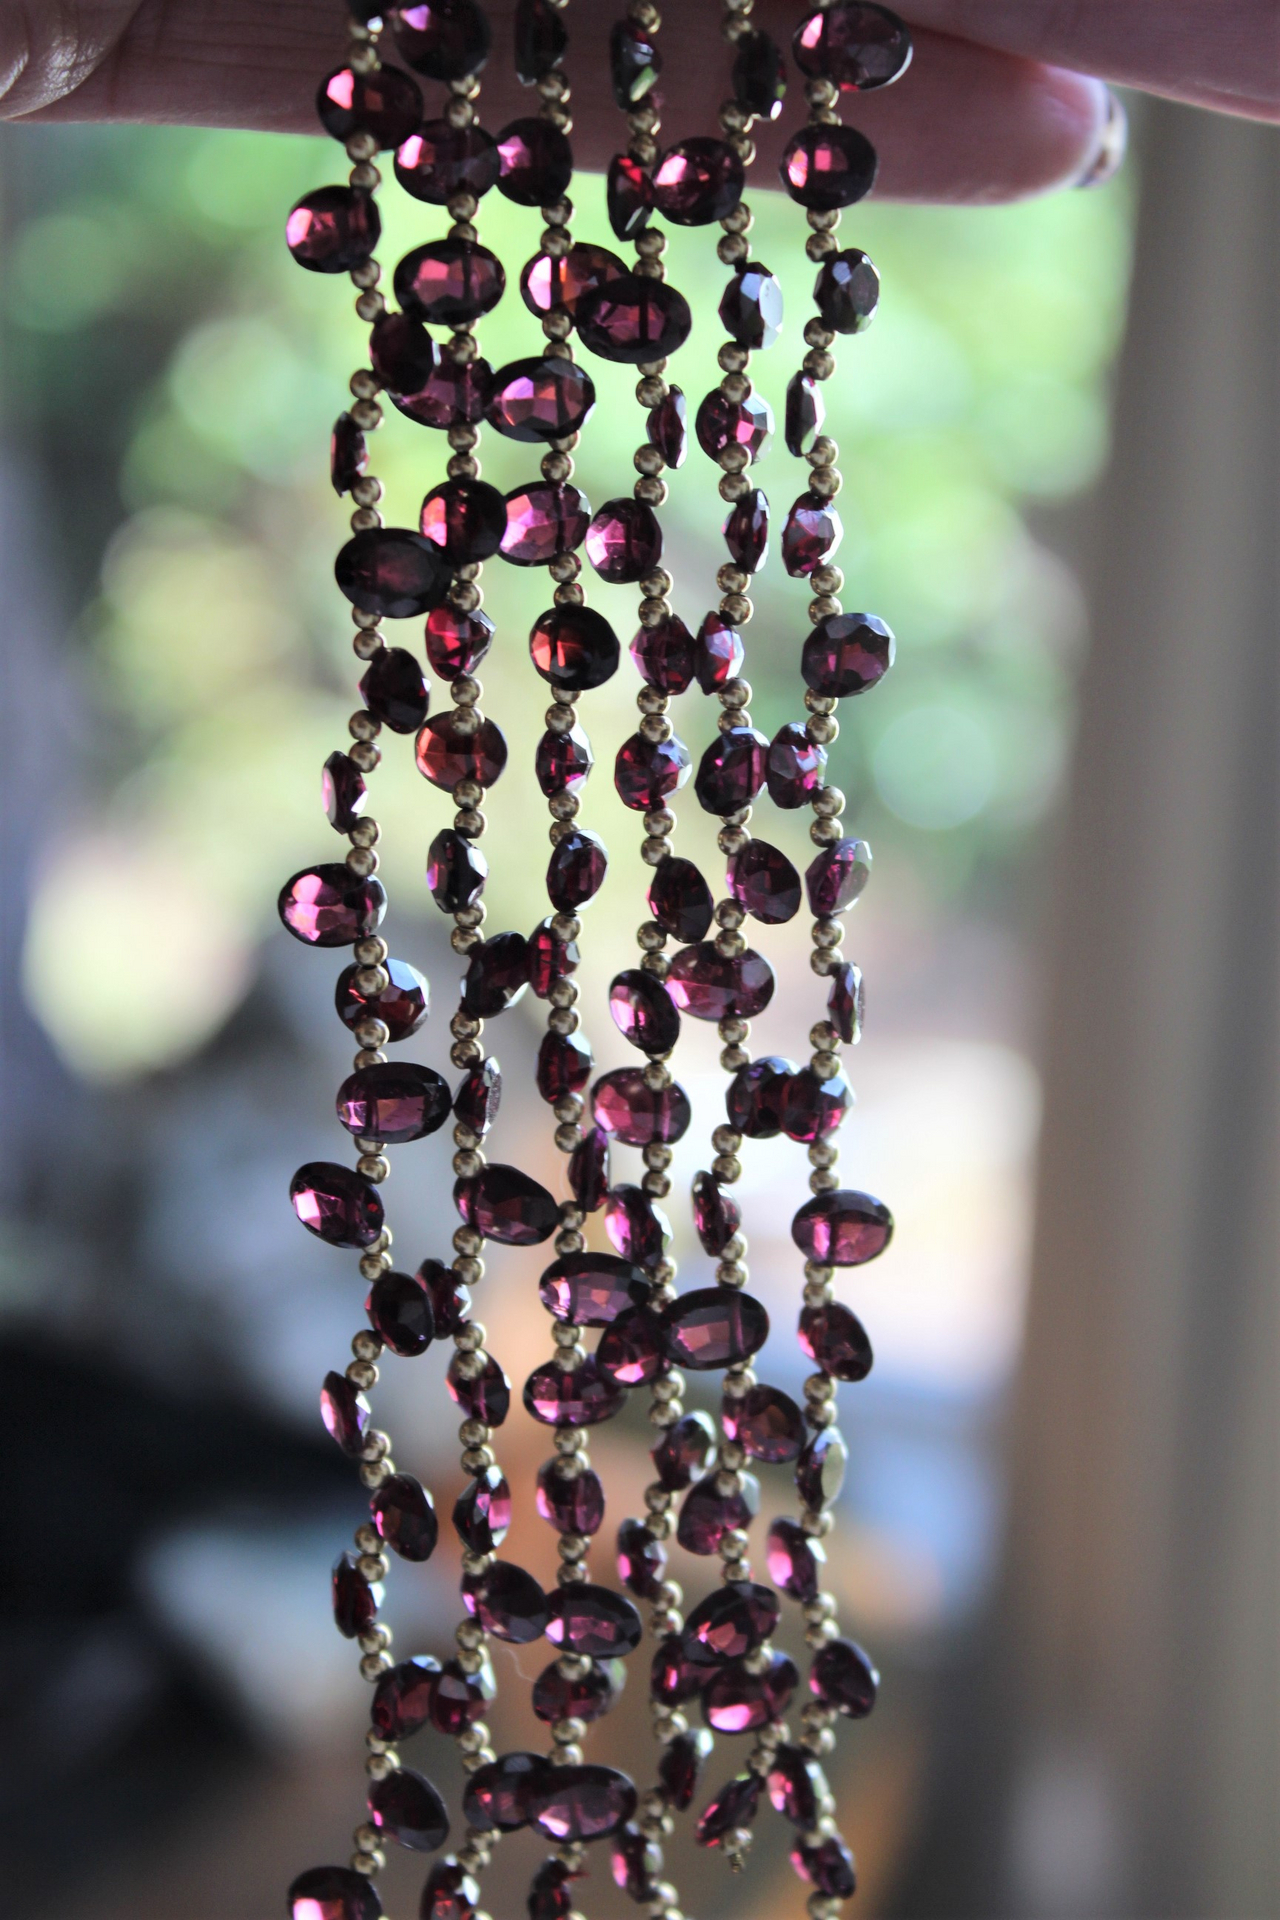 Amazing 59 inch long Faceted Garnet Lariat Tie Necklace with 14K Gold Beads